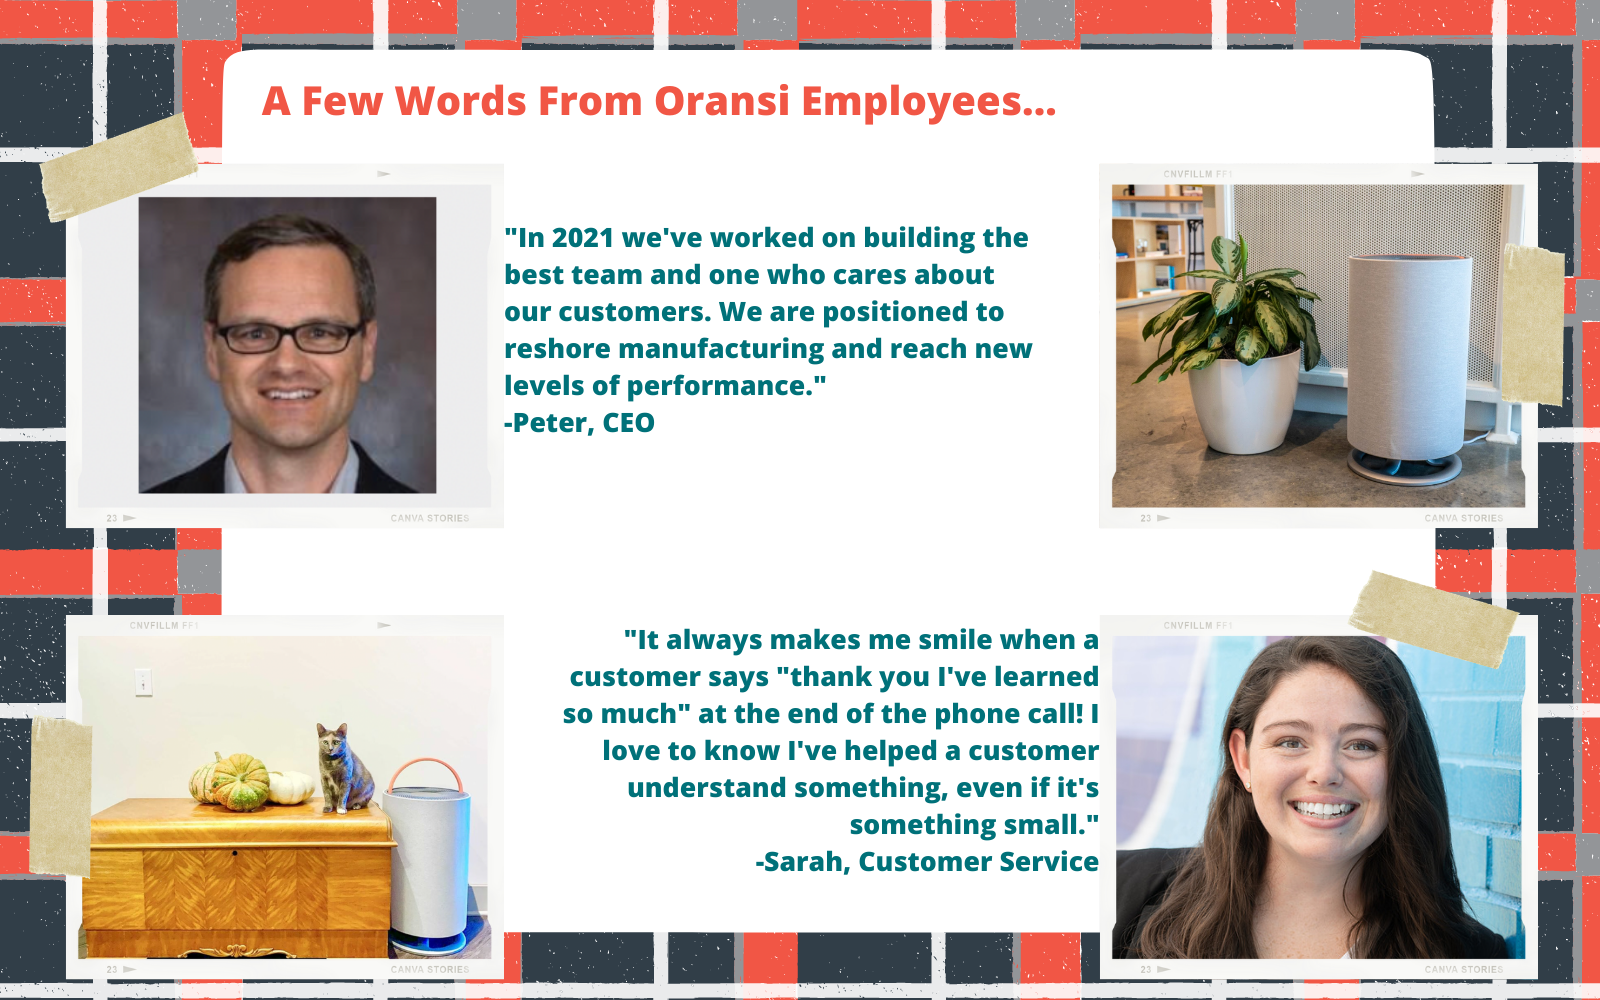 Quotes from Oransi employees about 2021